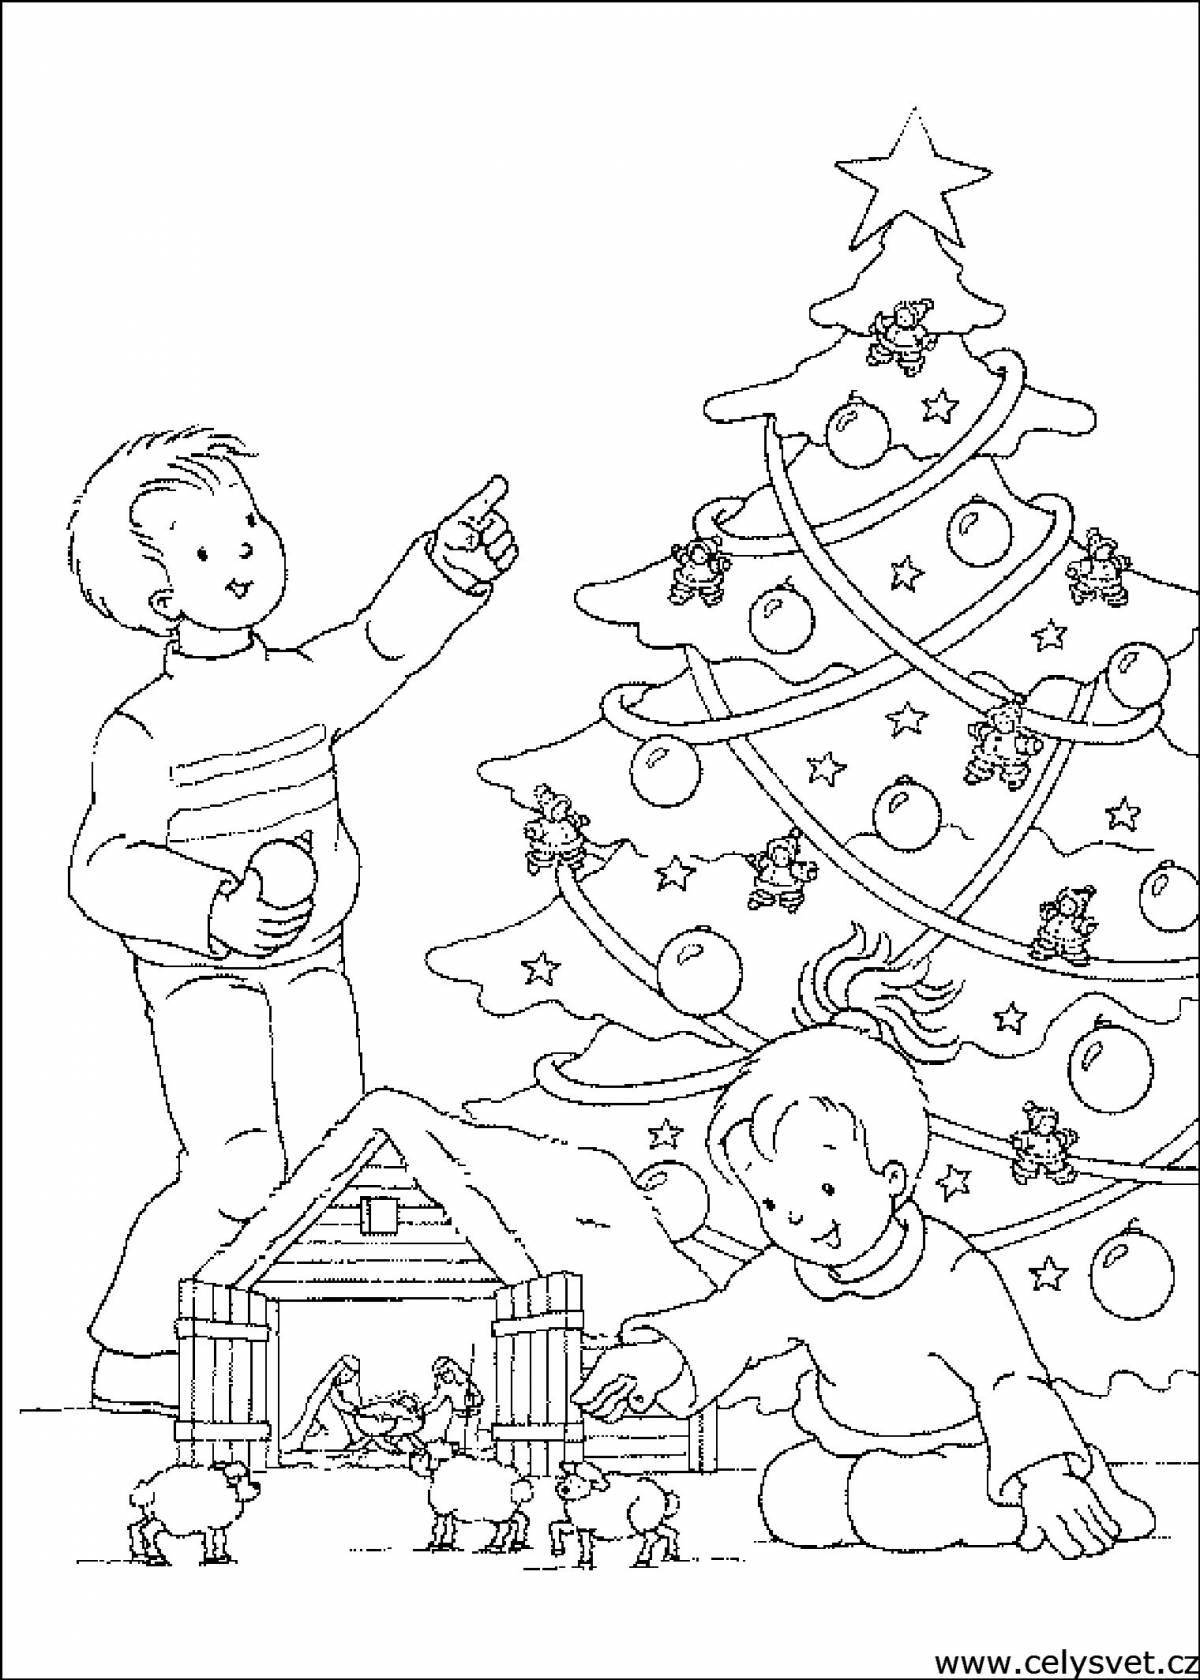 Merry Christmas family coloring book